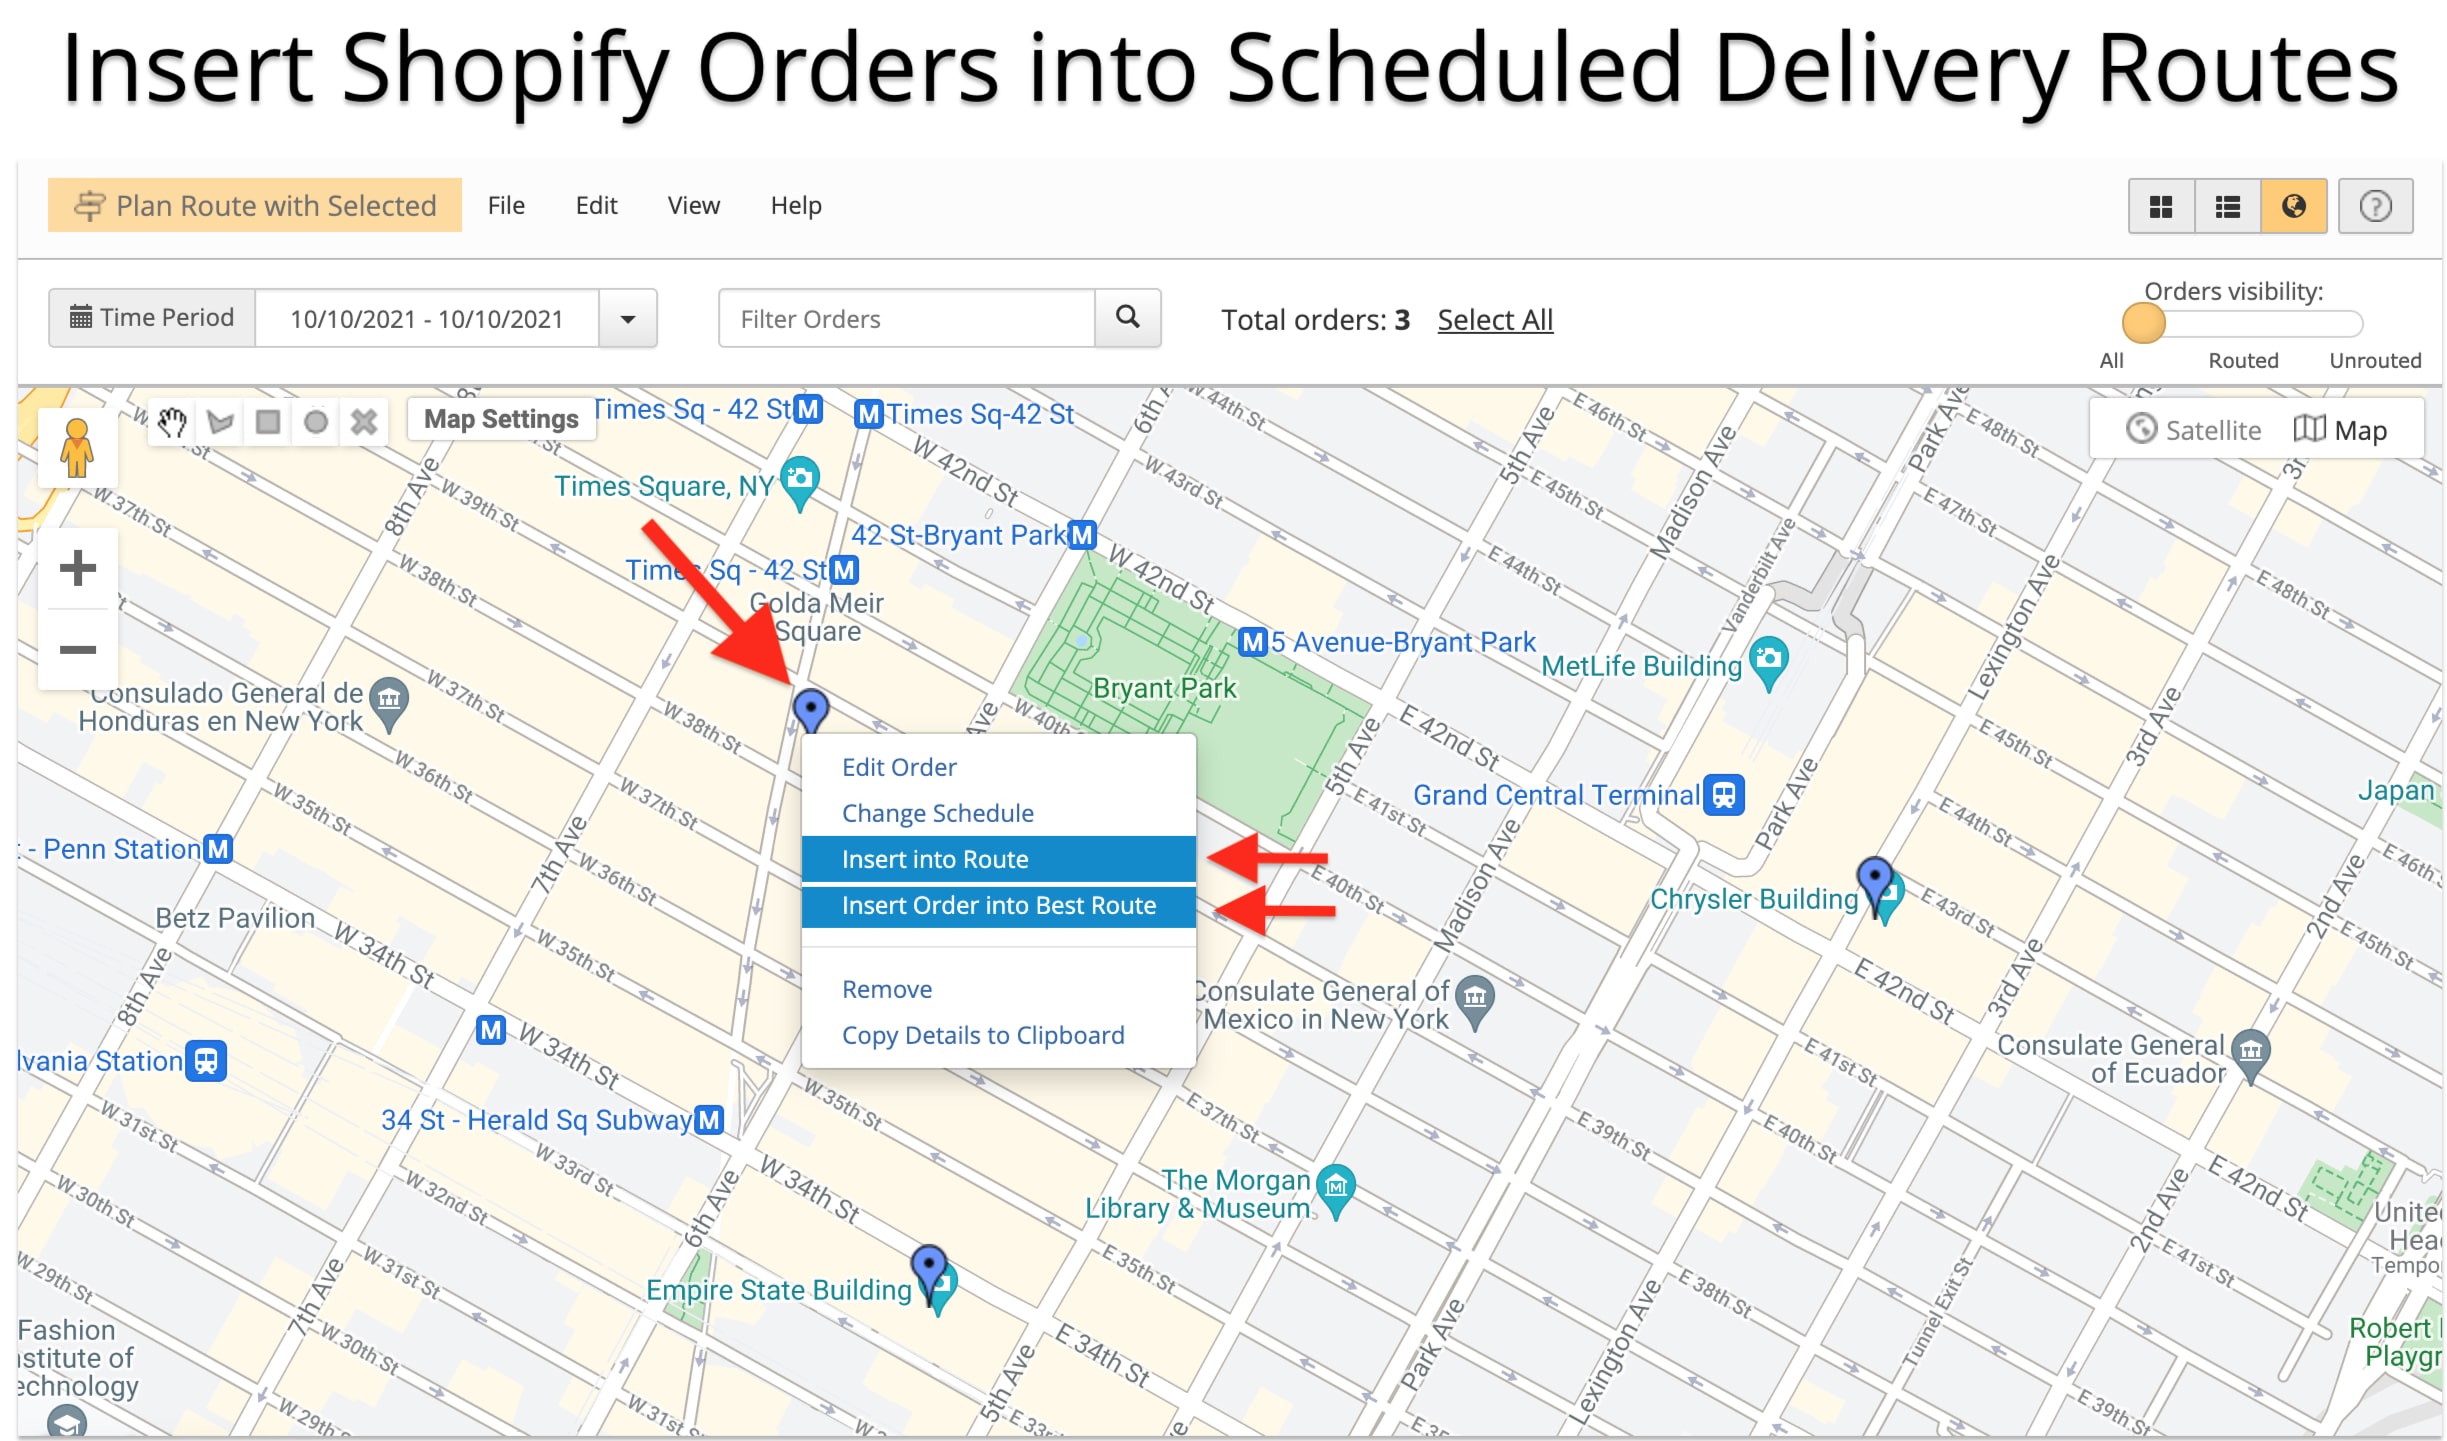 Insert scheduled Shopify orders into the best driver routes for efficient parcel delivery.